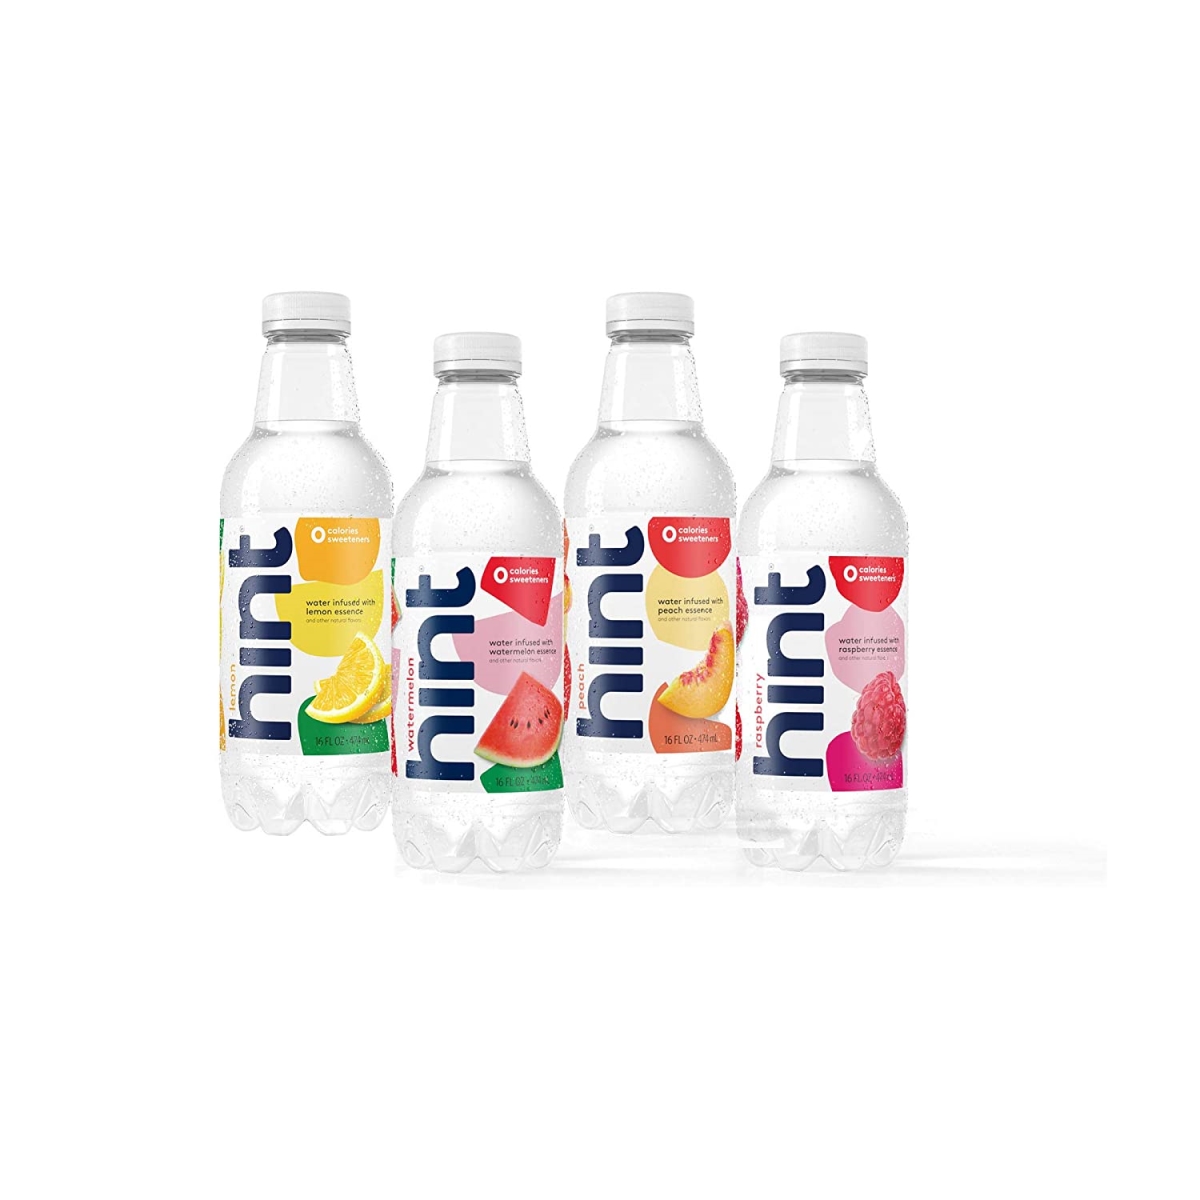 Picture of Hint 2401149 16.9 fl oz 4-Flavor Sparkling Water